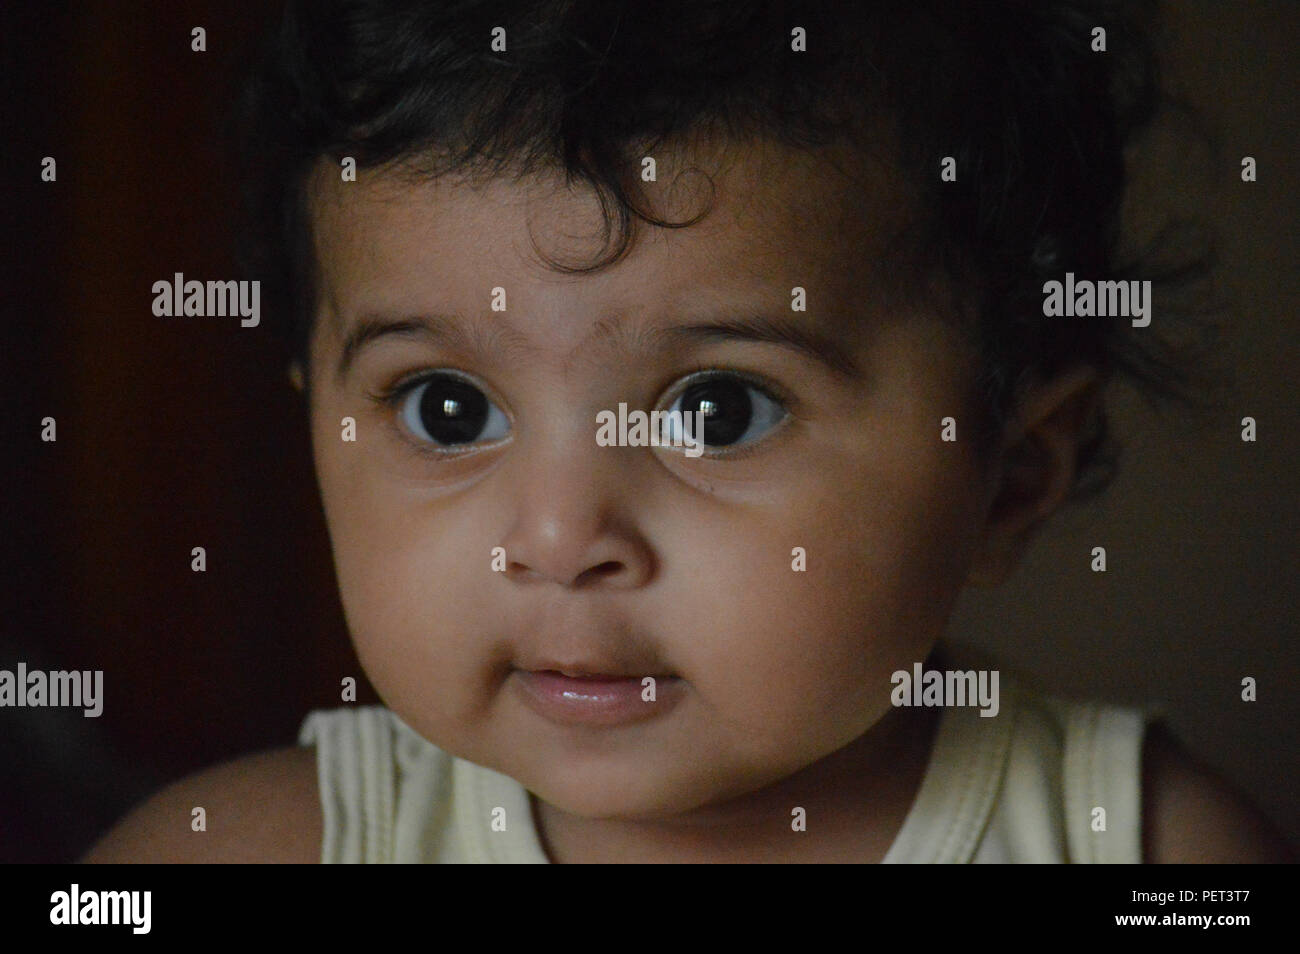 Infant's close up of am adorable very expressive big eyed cute Indian's delightful face a real treasure and pleasure to look at. Stock Photo